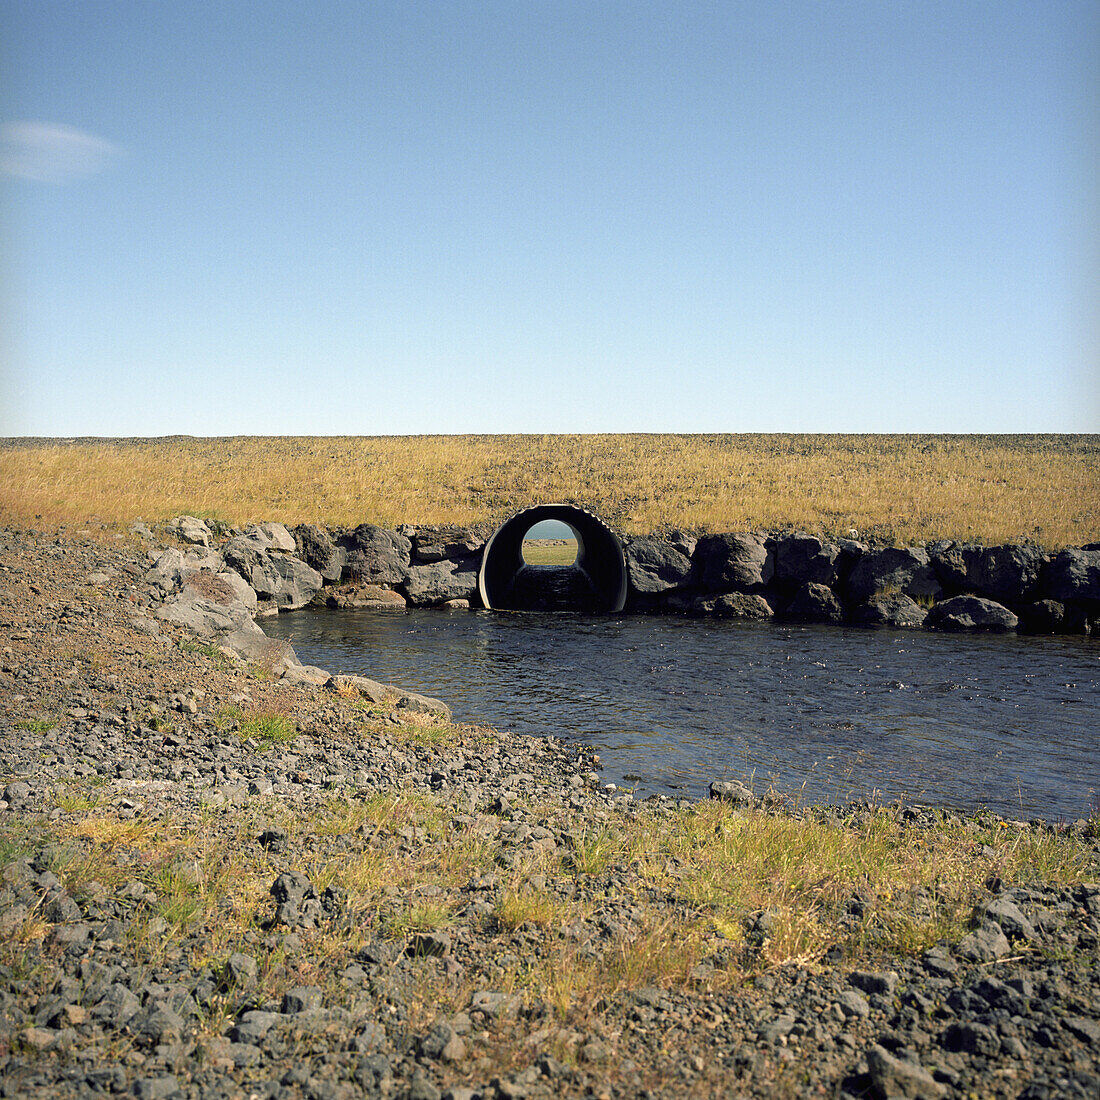 A culvert pipe carrying water for a stream under a field